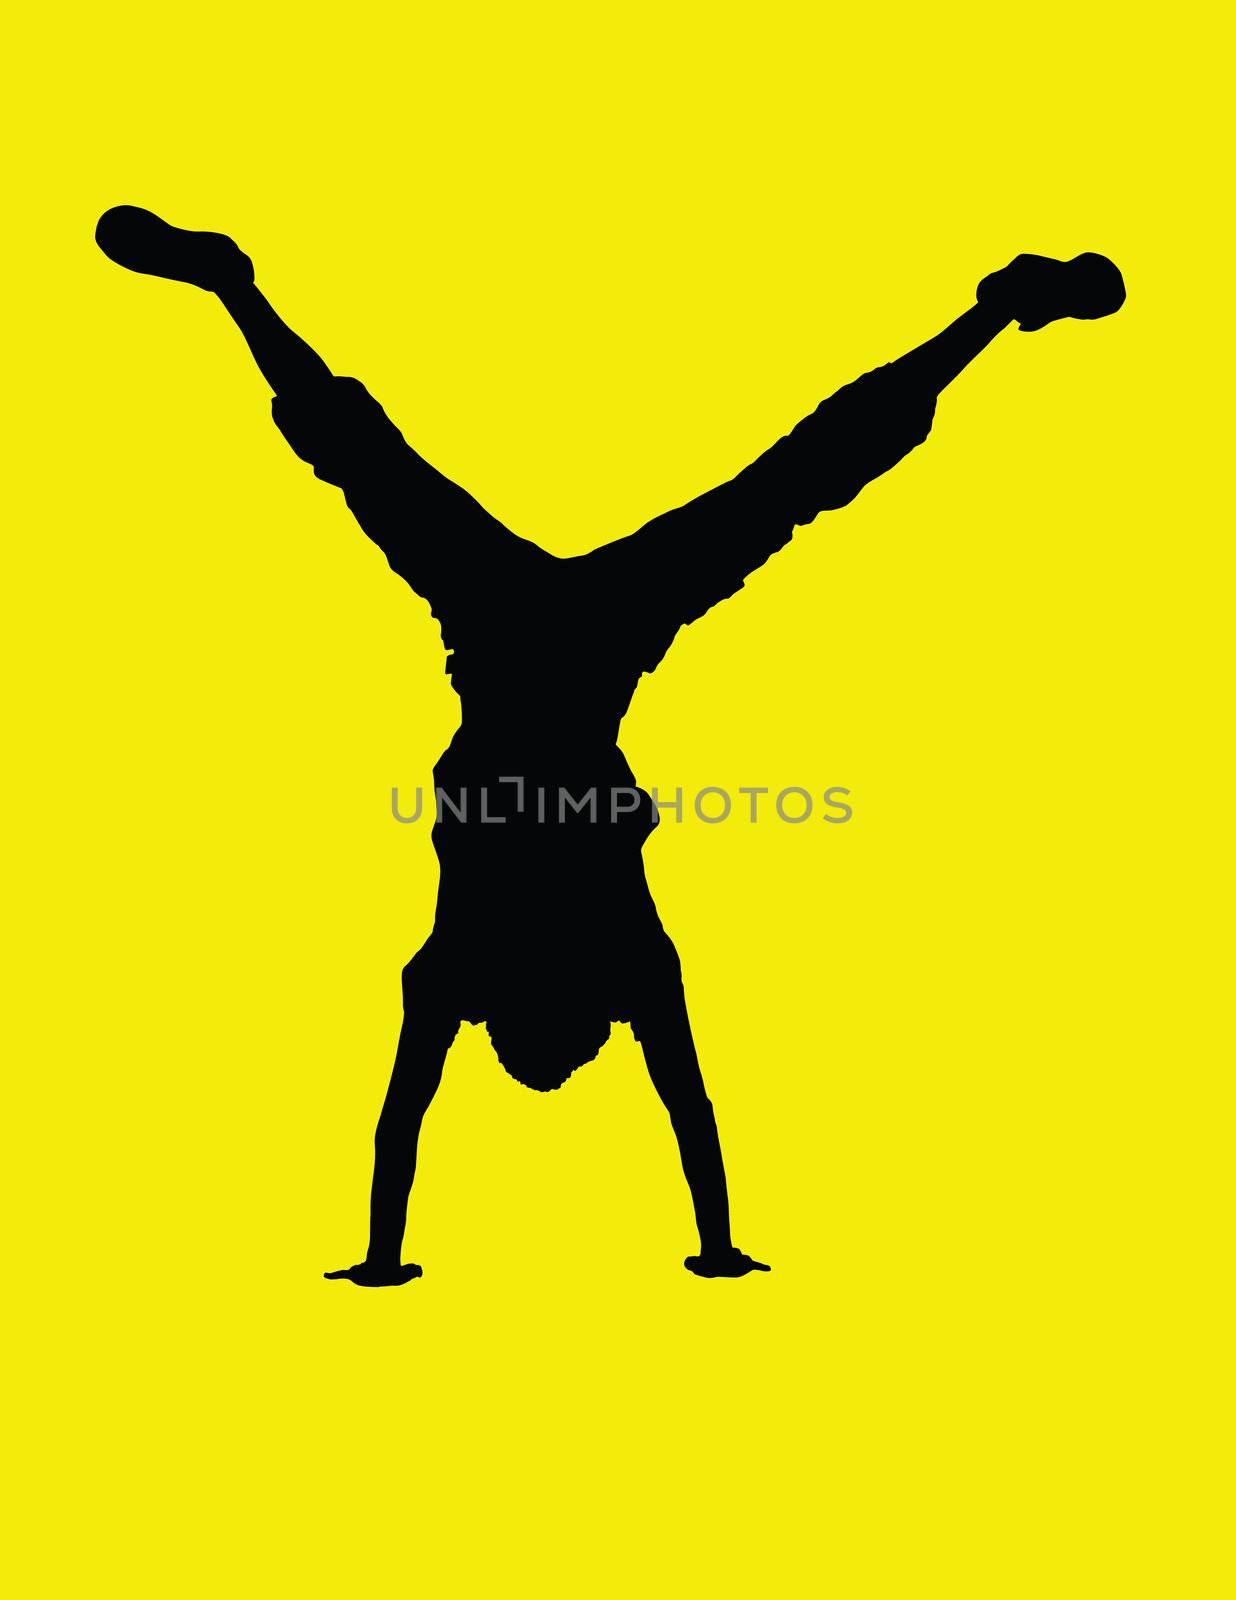 isolated on yellow background ,made from my image